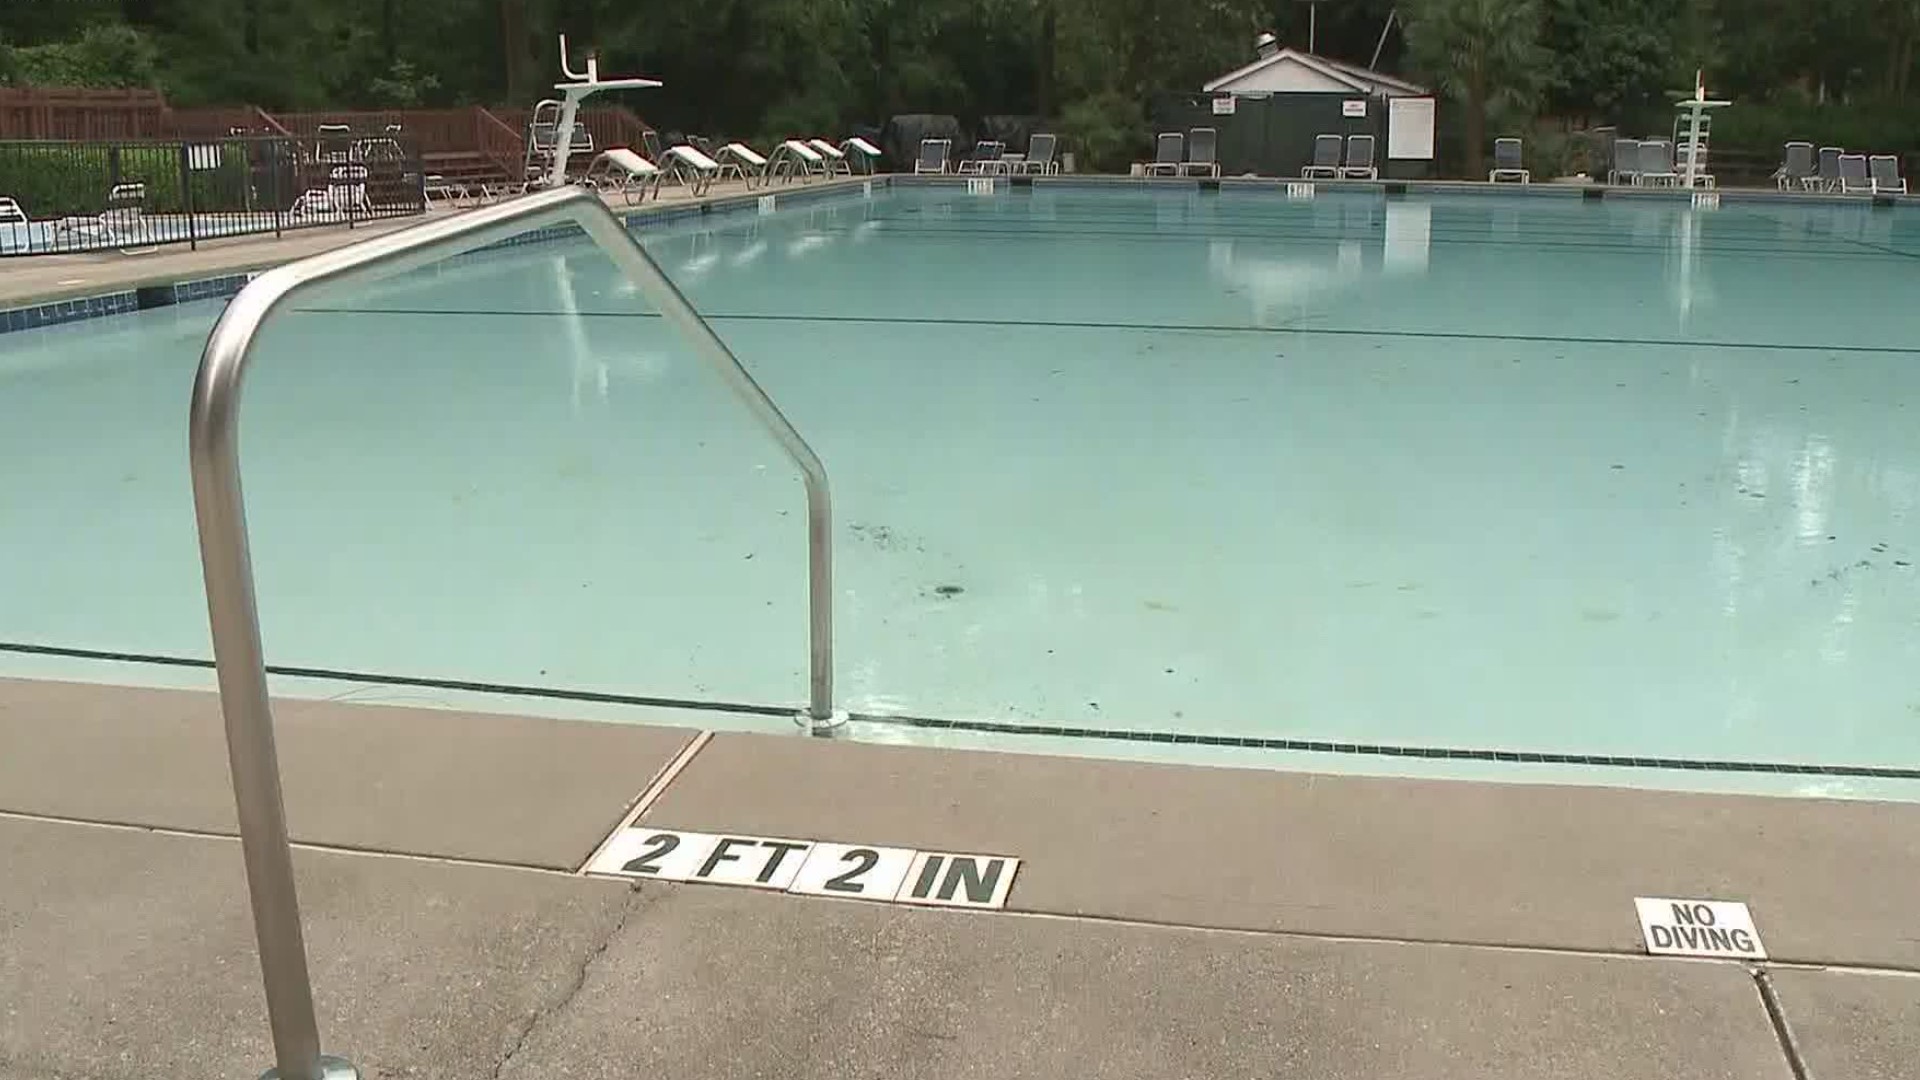 Pools across the state are allowed to open- following guidelines to keep swimmers and staff safe.